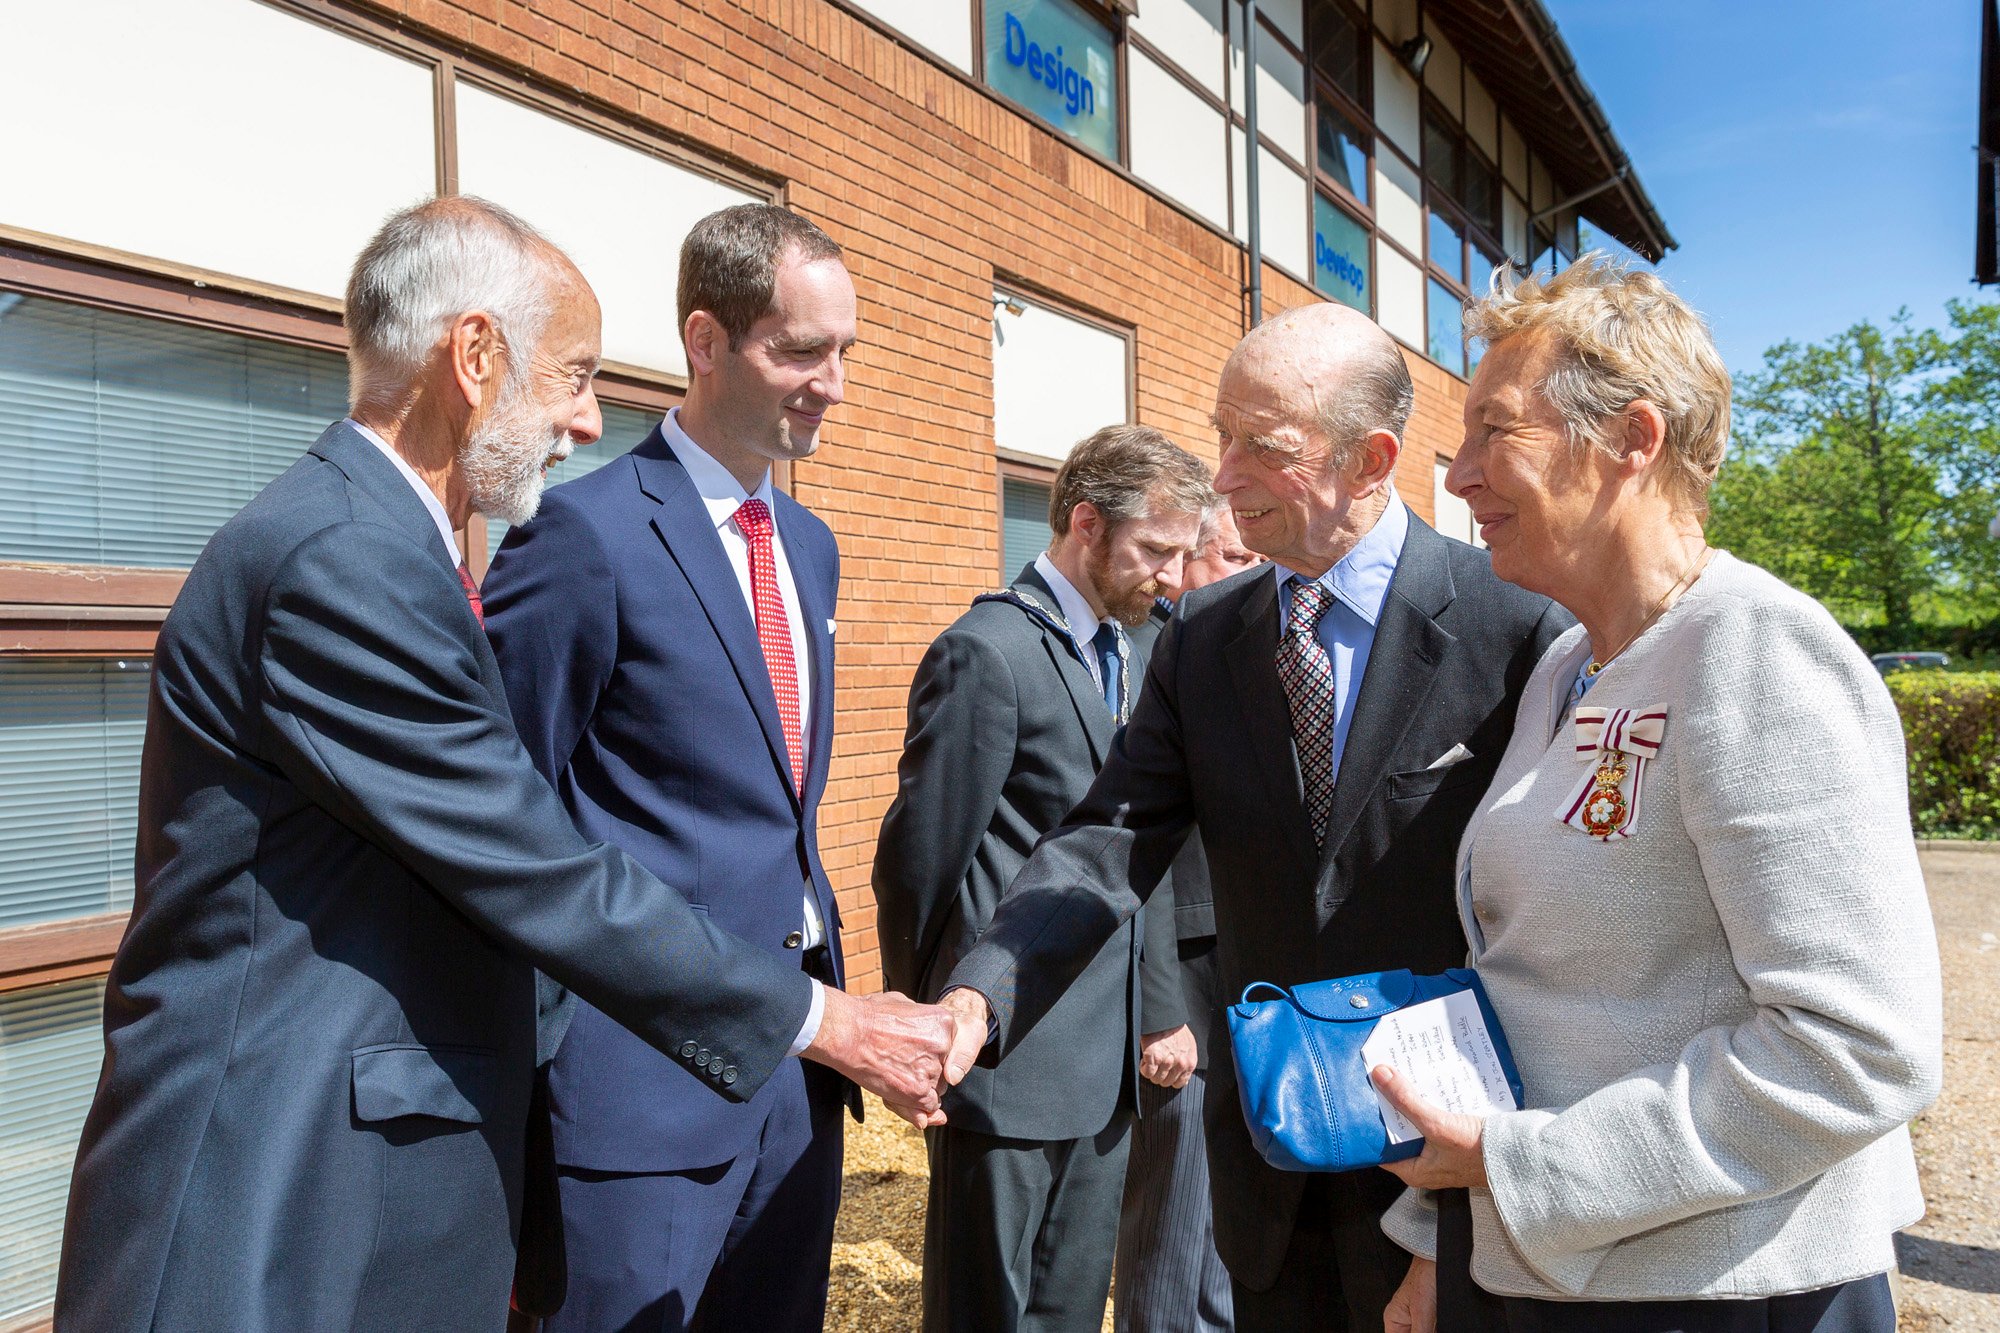 The Duke arrives at 42 Technology accompanied by HM Lord Lieutant of Cambridgeshire